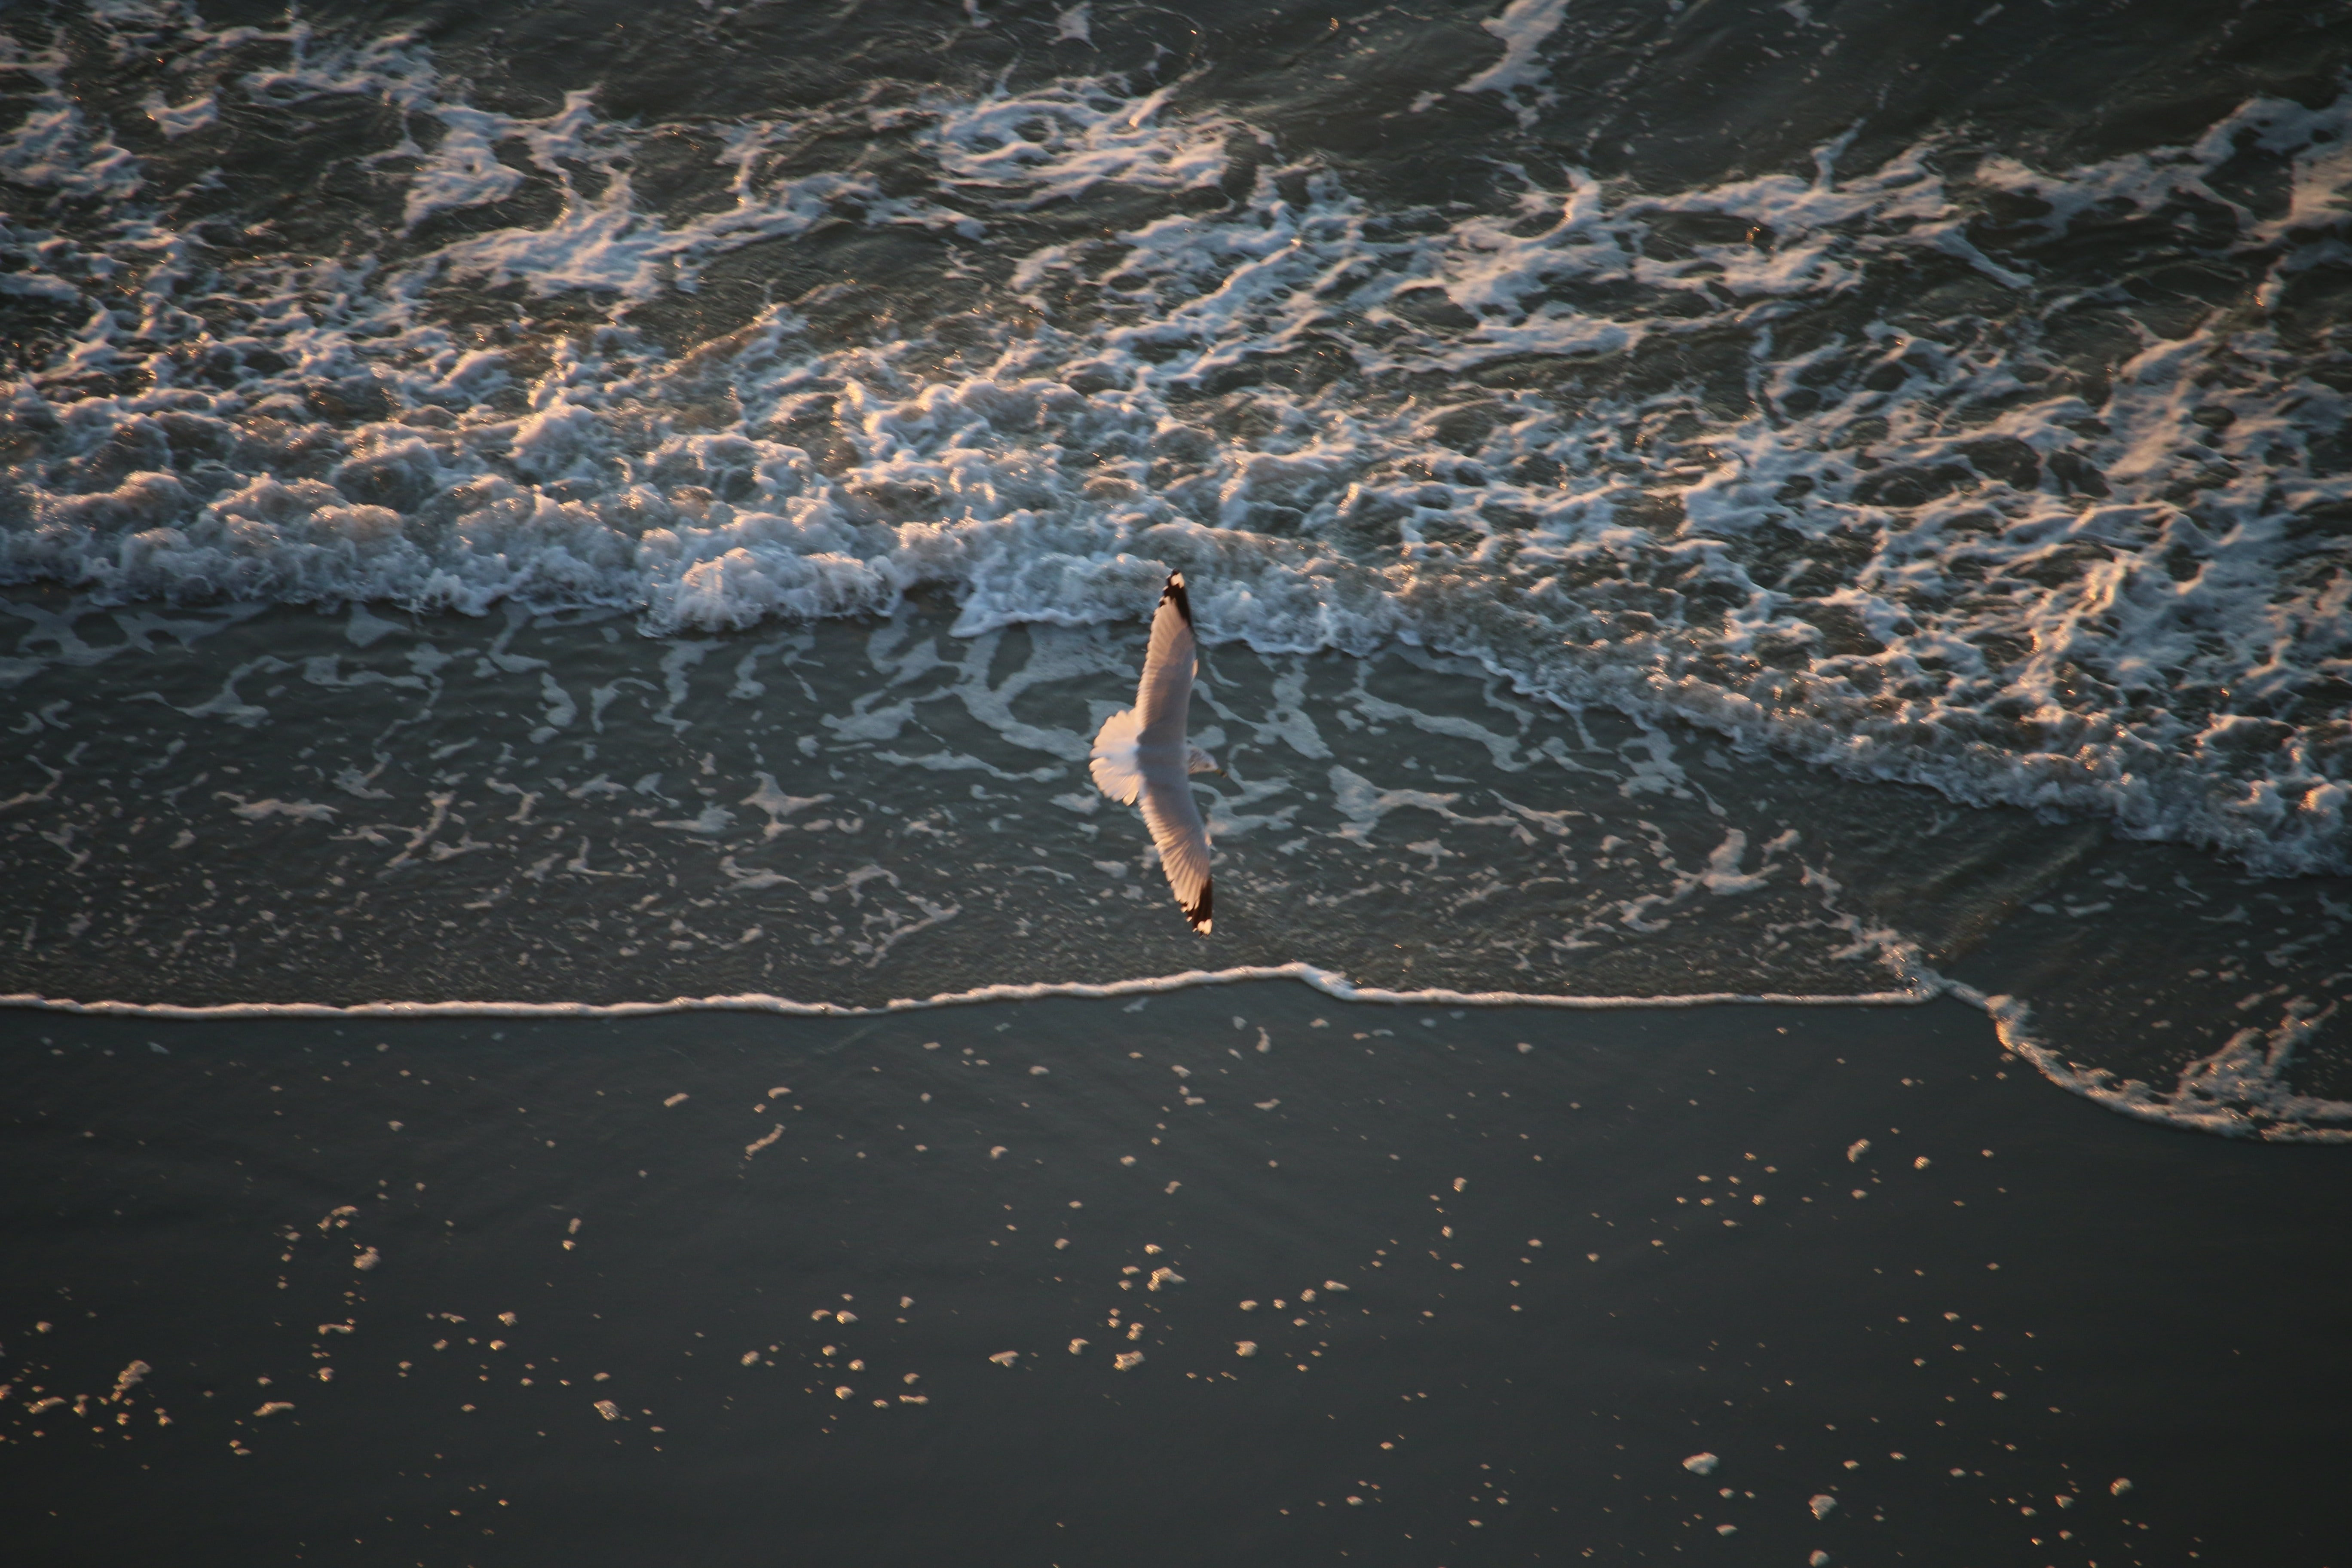 seagulls, waves, water, real people, nature, day, one person